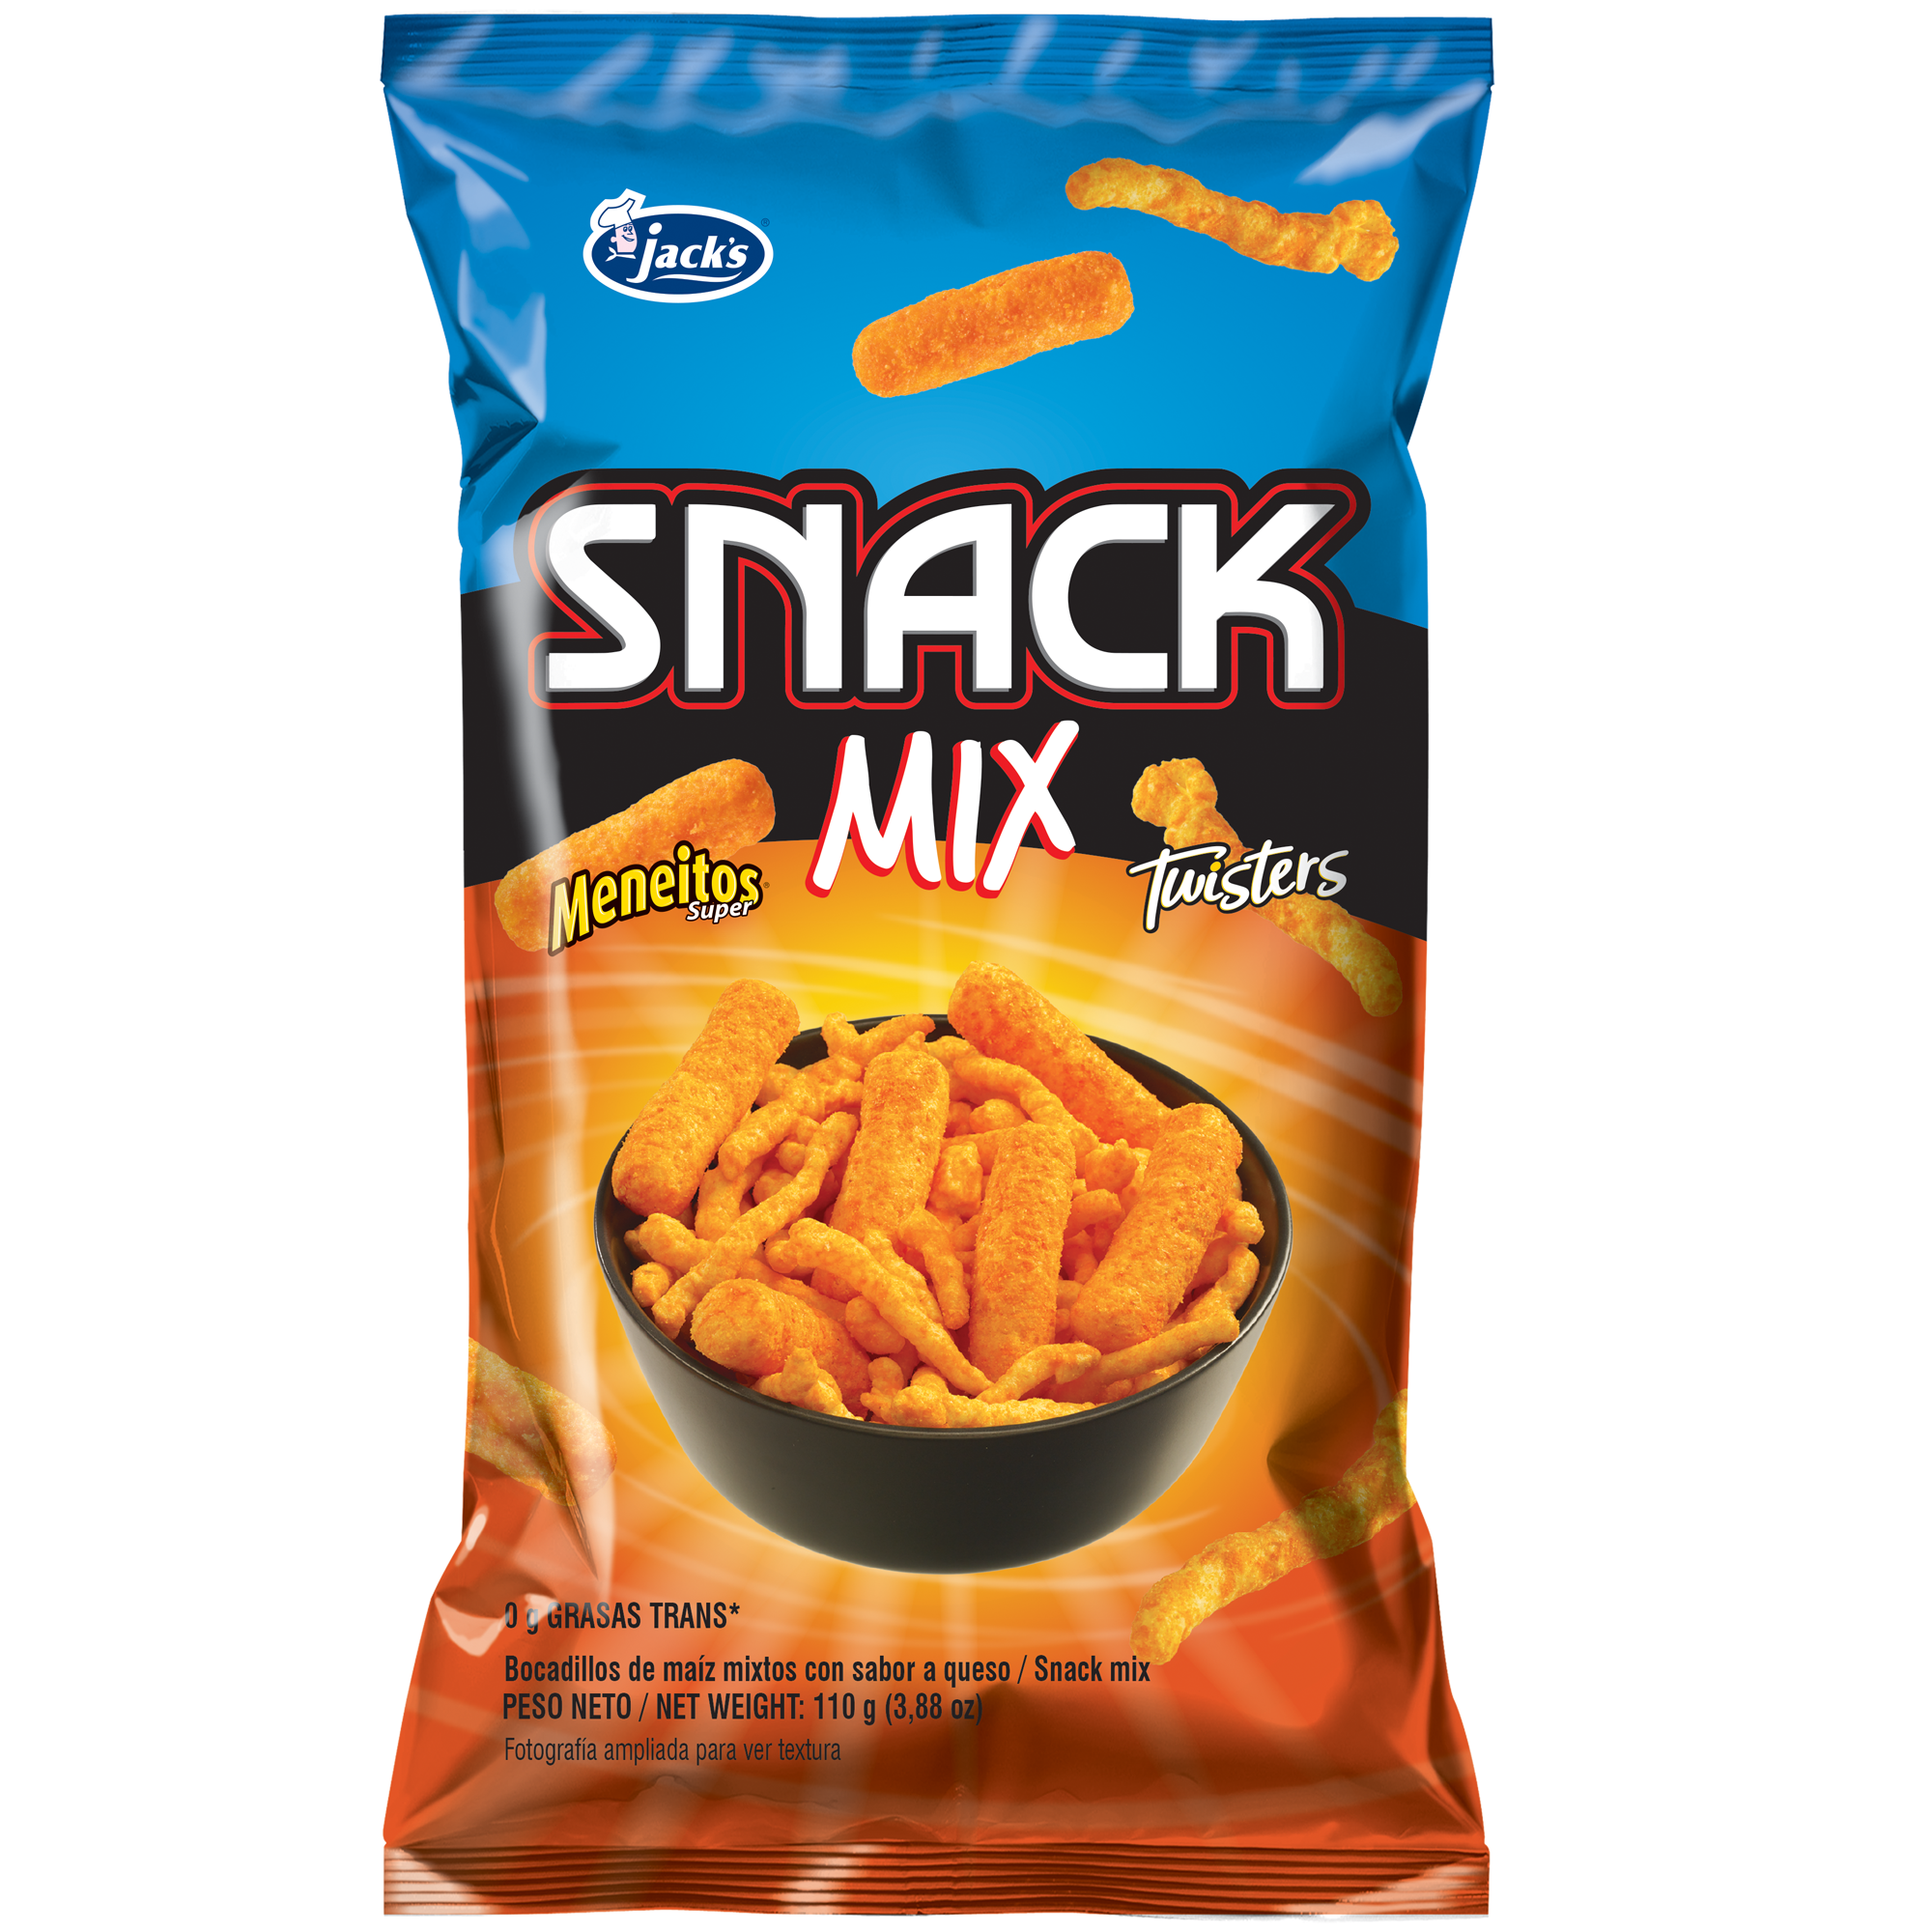 SNACK MIX pag web